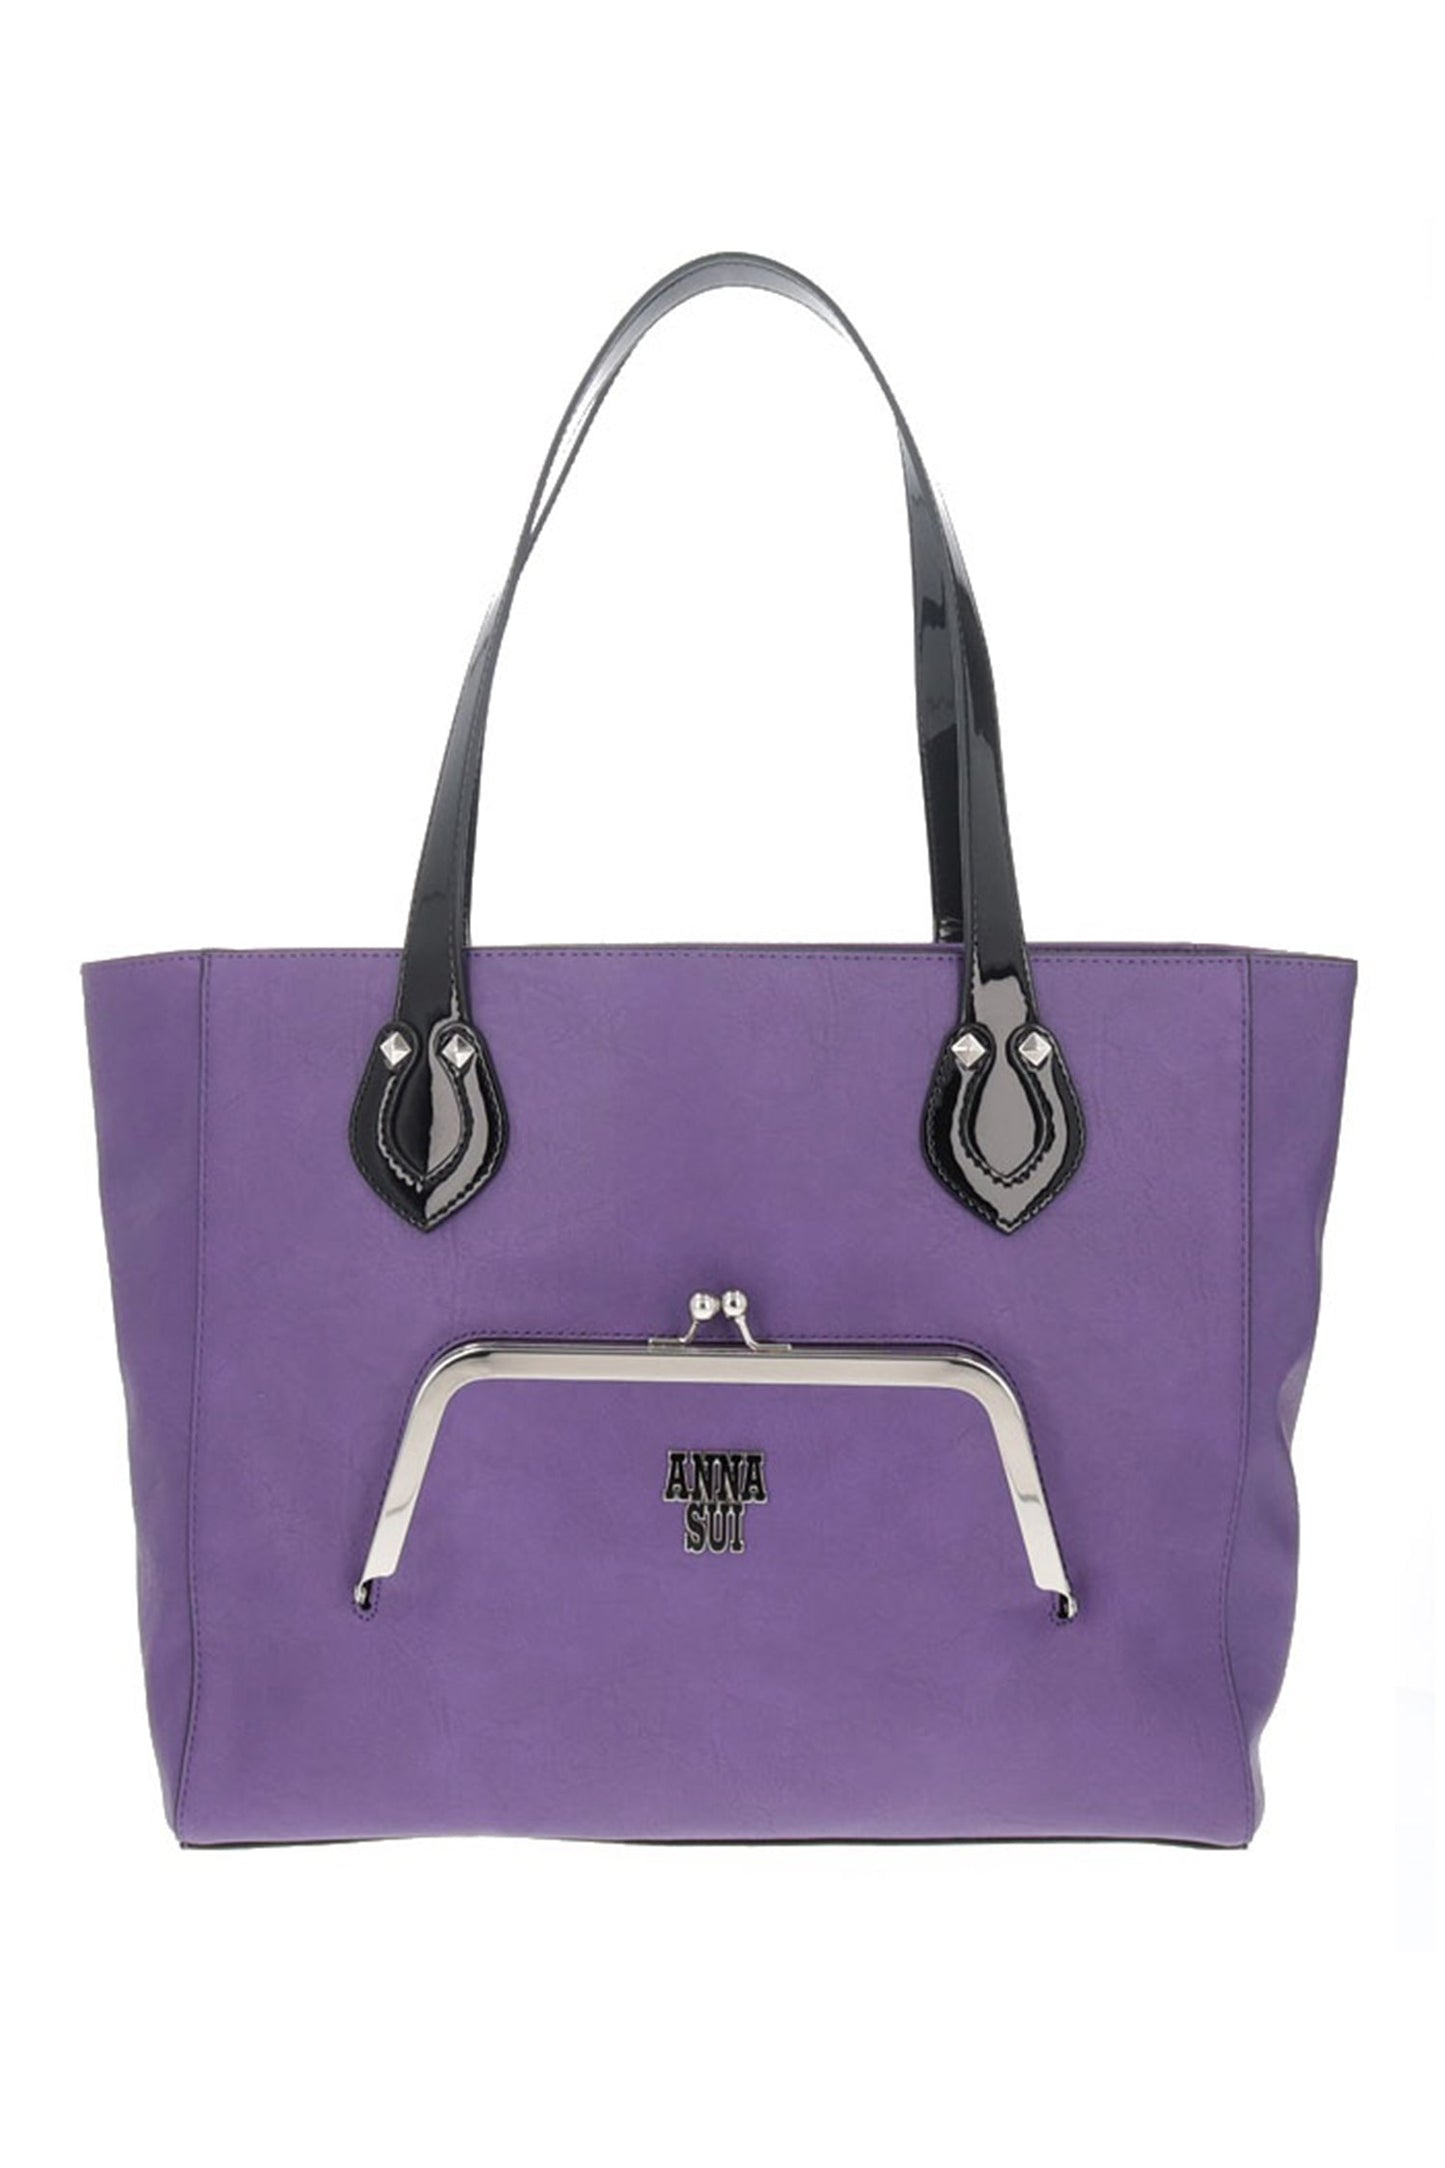 Metallica Large Tote Bag Purple, purse in front with silver claps, Anna Sui logo, 2 handles 